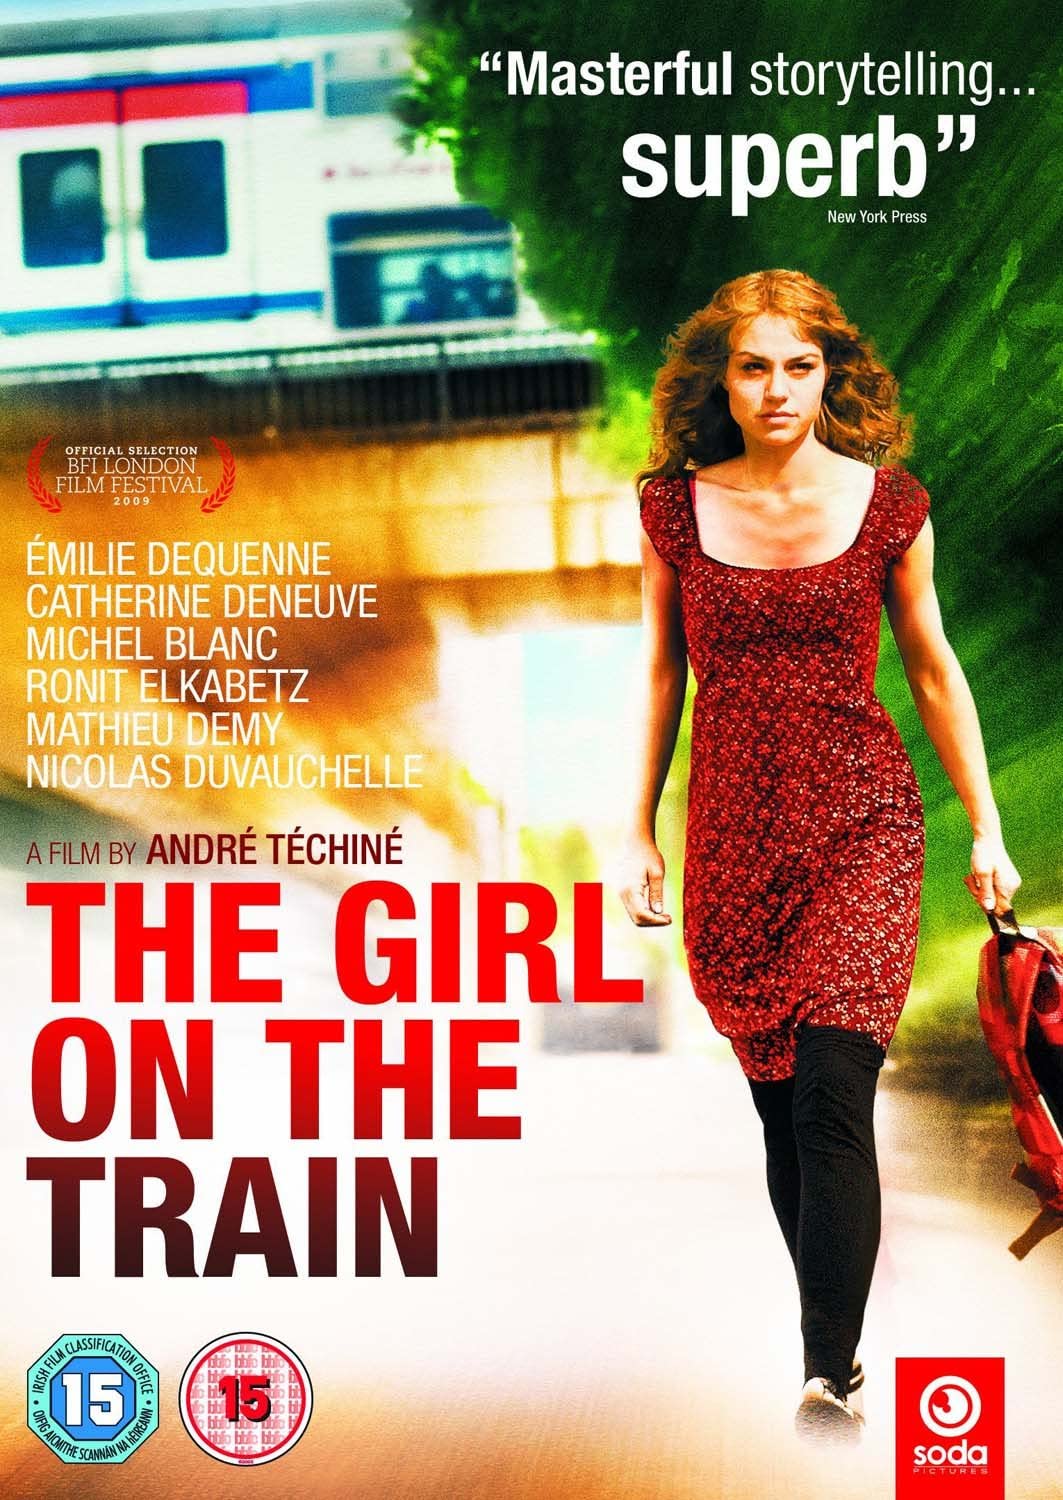 The Girl on the Train [2009] - Thriller/Mystery [DVD]